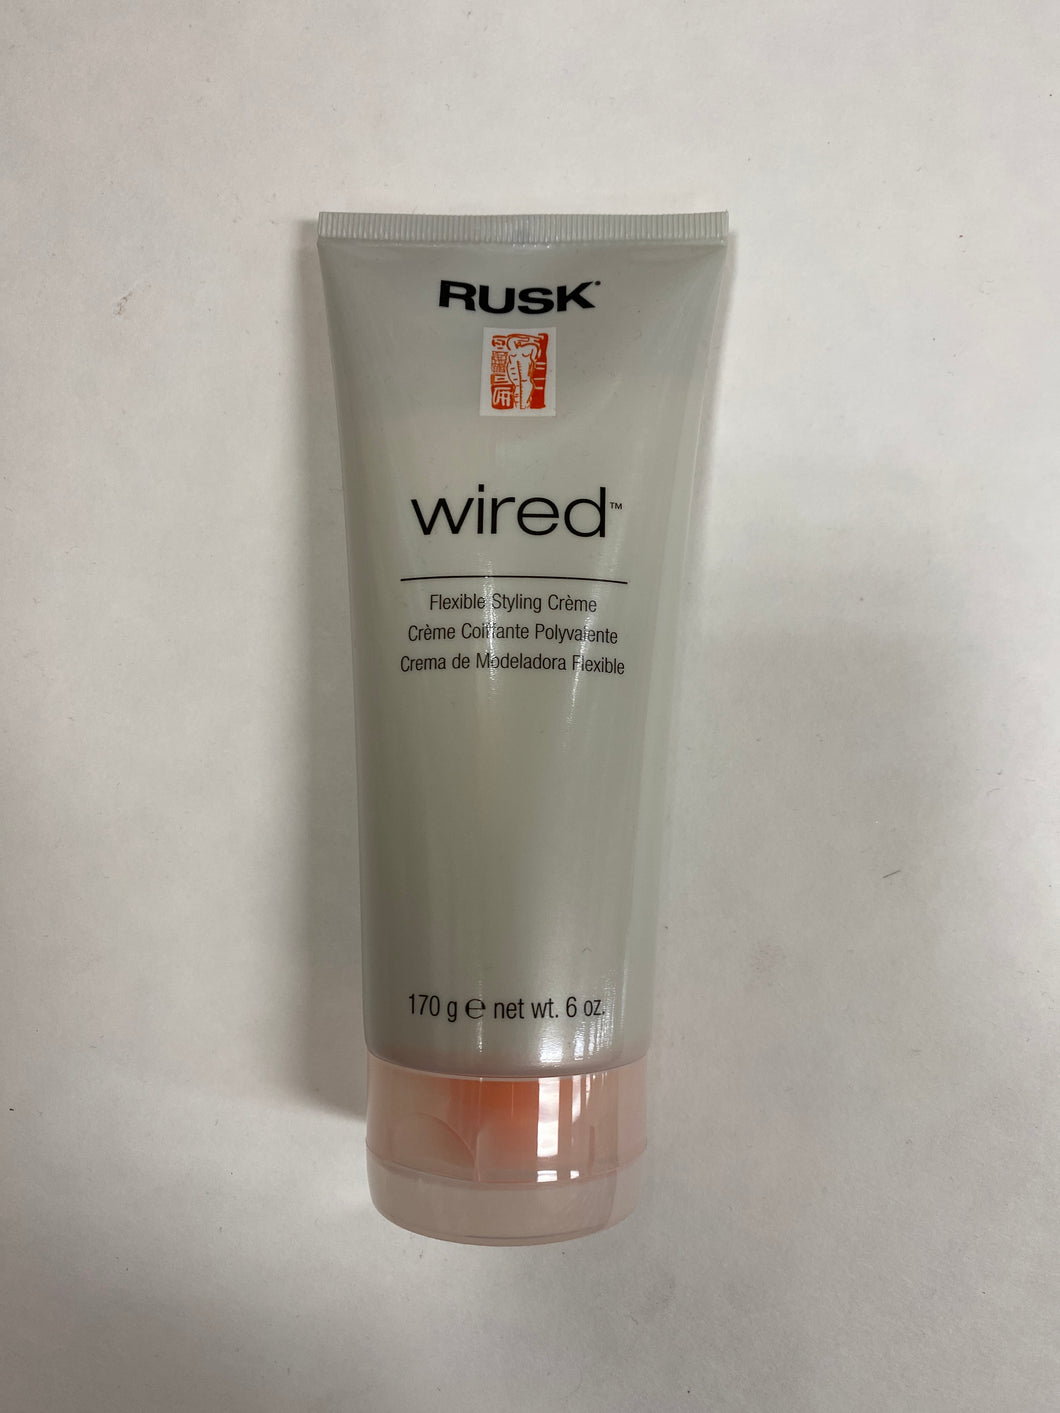 Rusk Wires Flexible Styling Creme